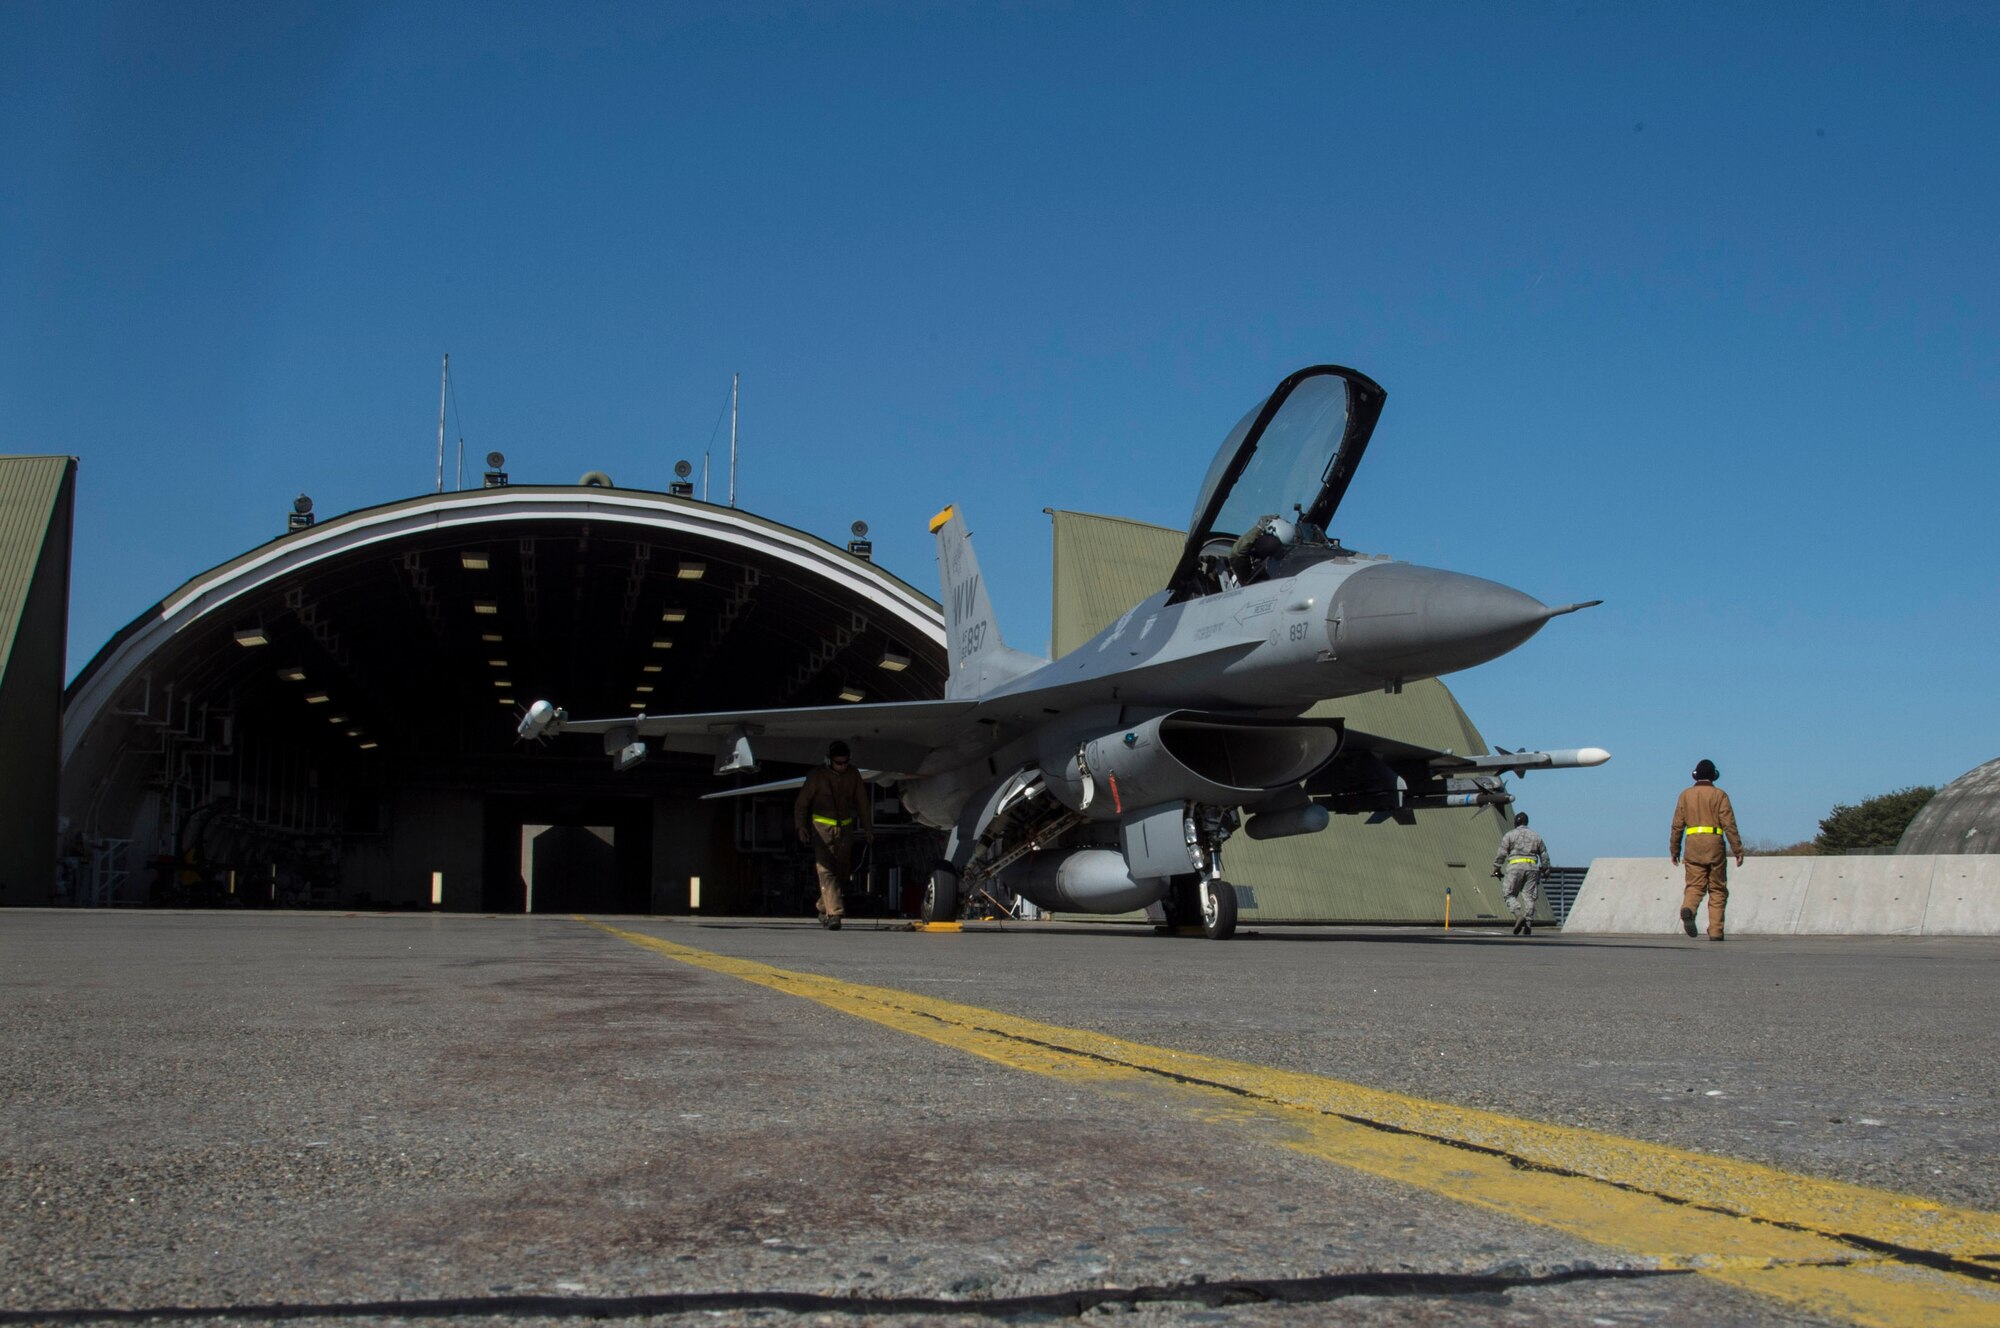 A U.S. Air Force F-16 Fighting Falcon sits on the flightline after a sortie during a two-day surge exercise at Misawa Air Base, Japan, April 5, 2016. During surge operations, the 35th Fighter Wing demonstrated their ability to generate aircraft in a combat-like scenario with an increase in sorties from between 10 to 20 each day, to approximately 70. (U.S. Air Force photo by Airman 1st Class Jordyn Fetter/Released)